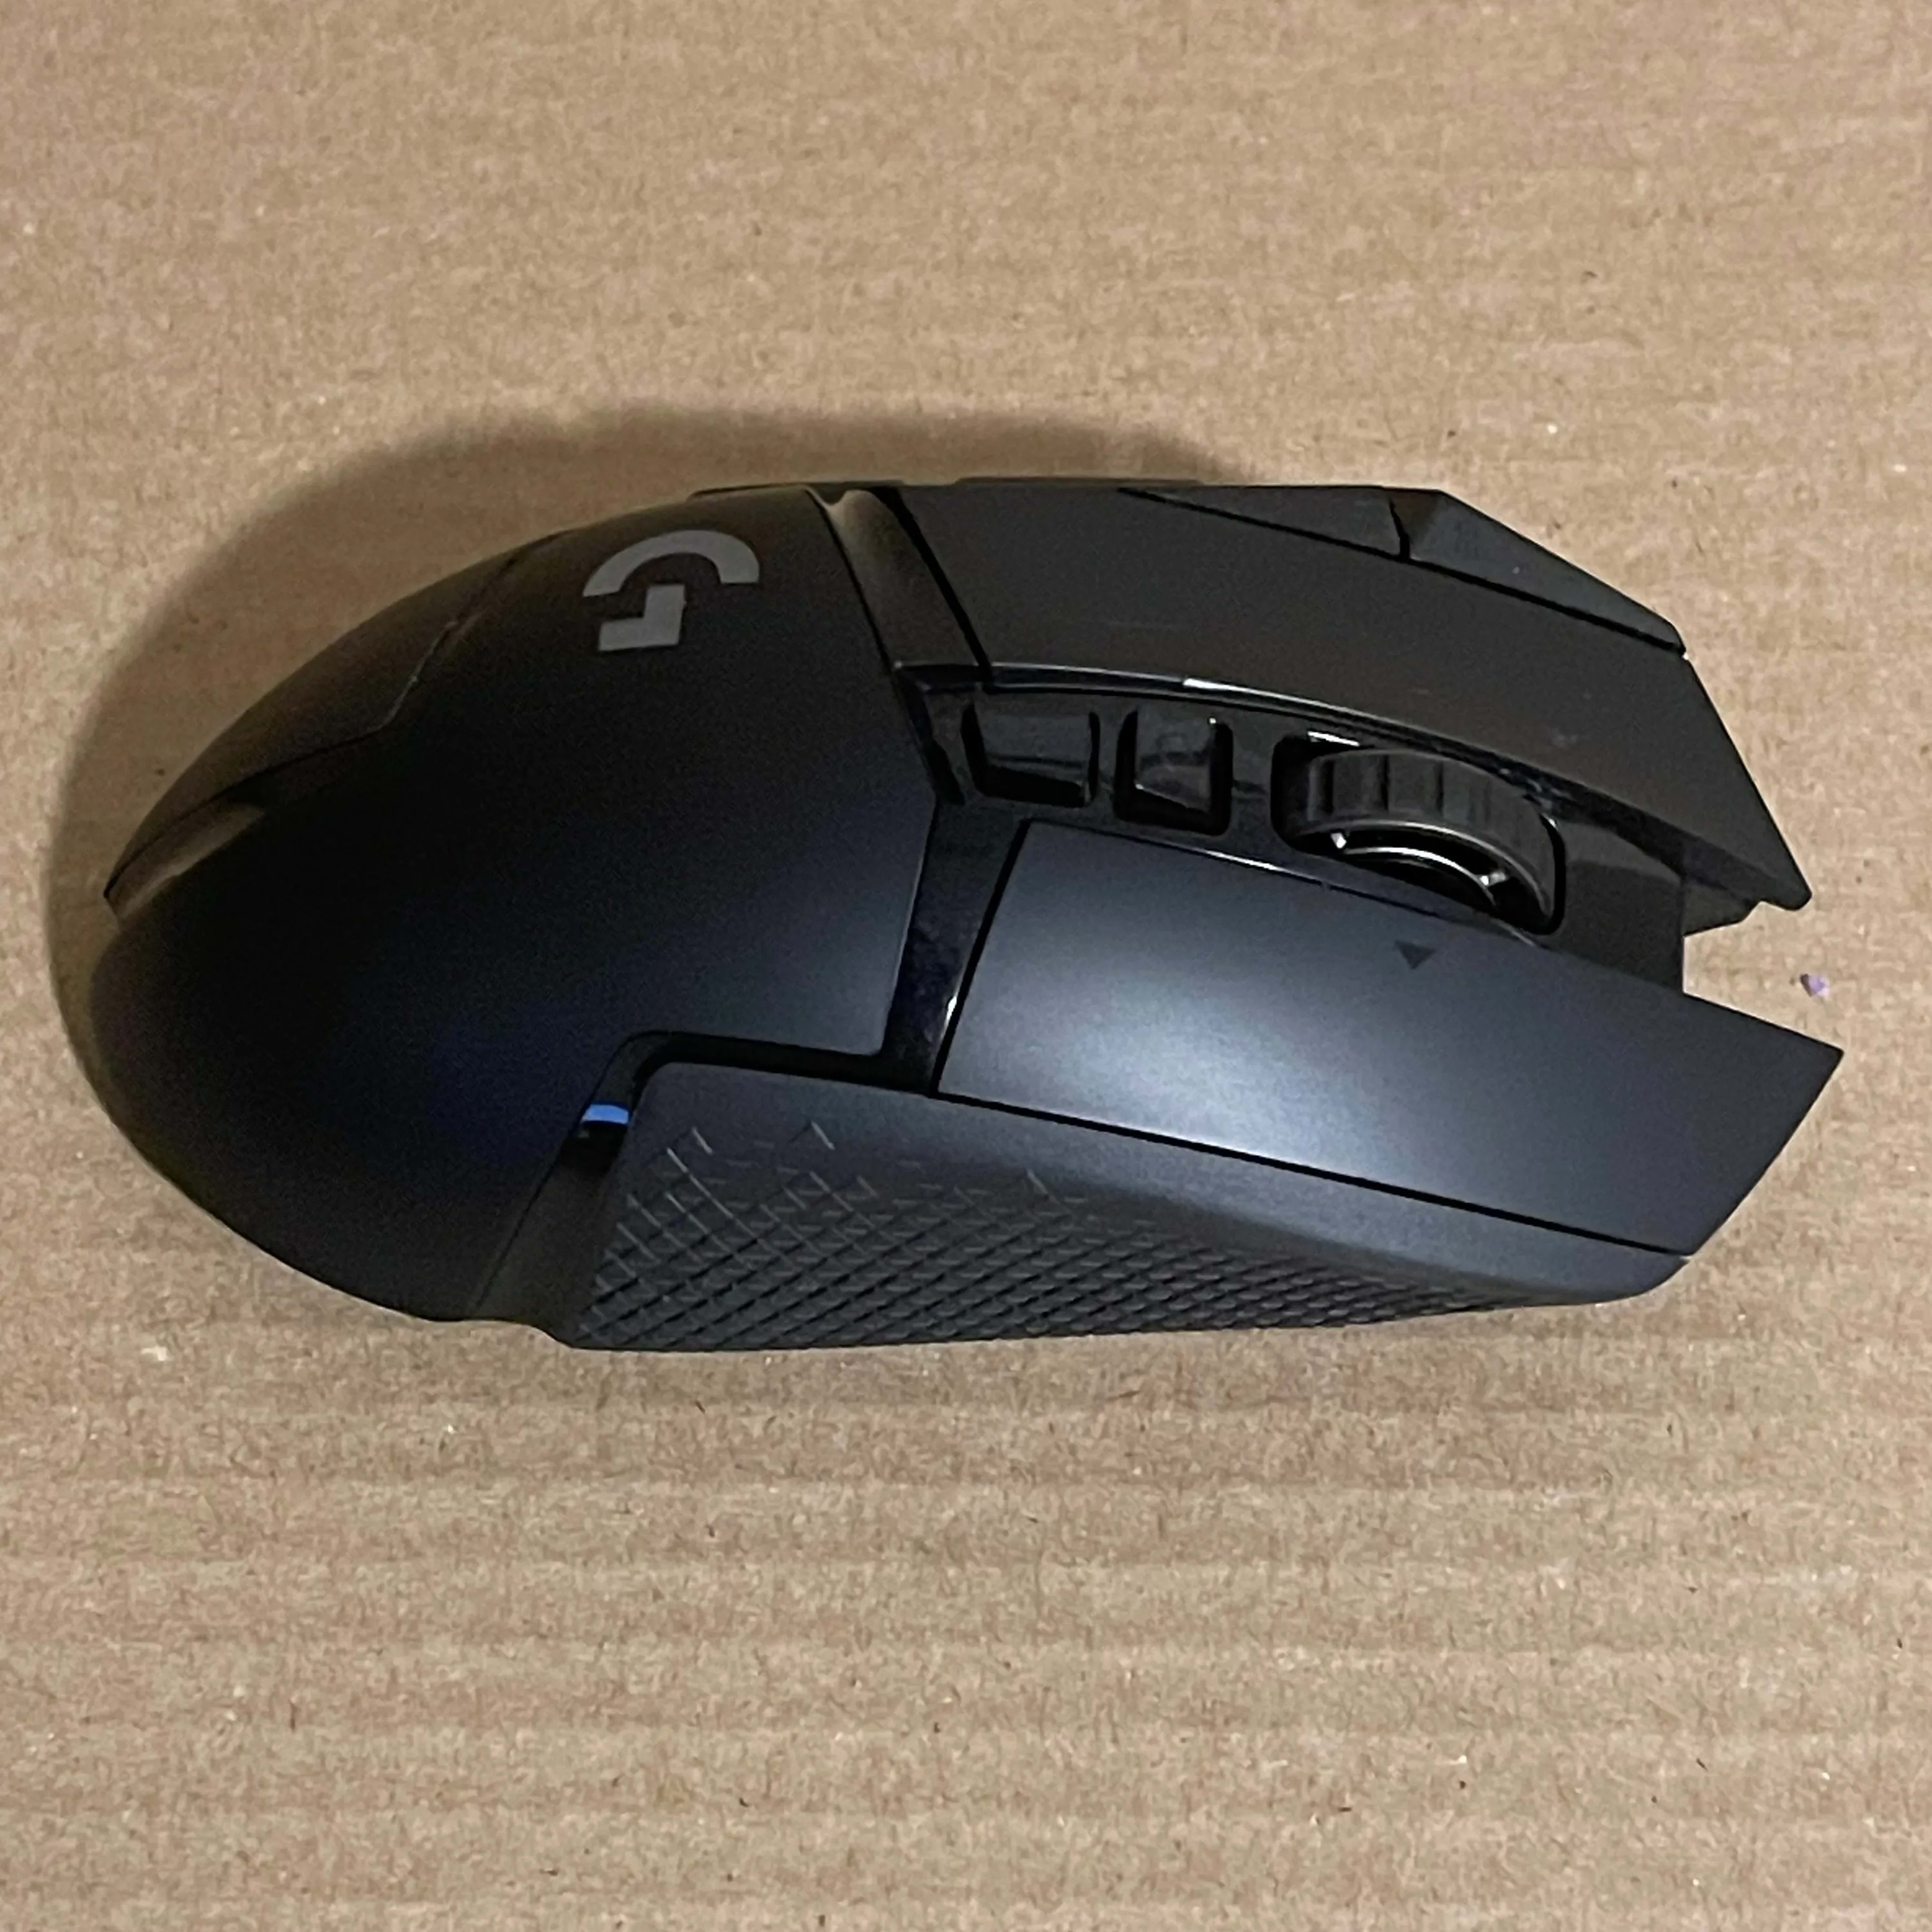 Logitech G502 Wireless Gaming Mouse Only